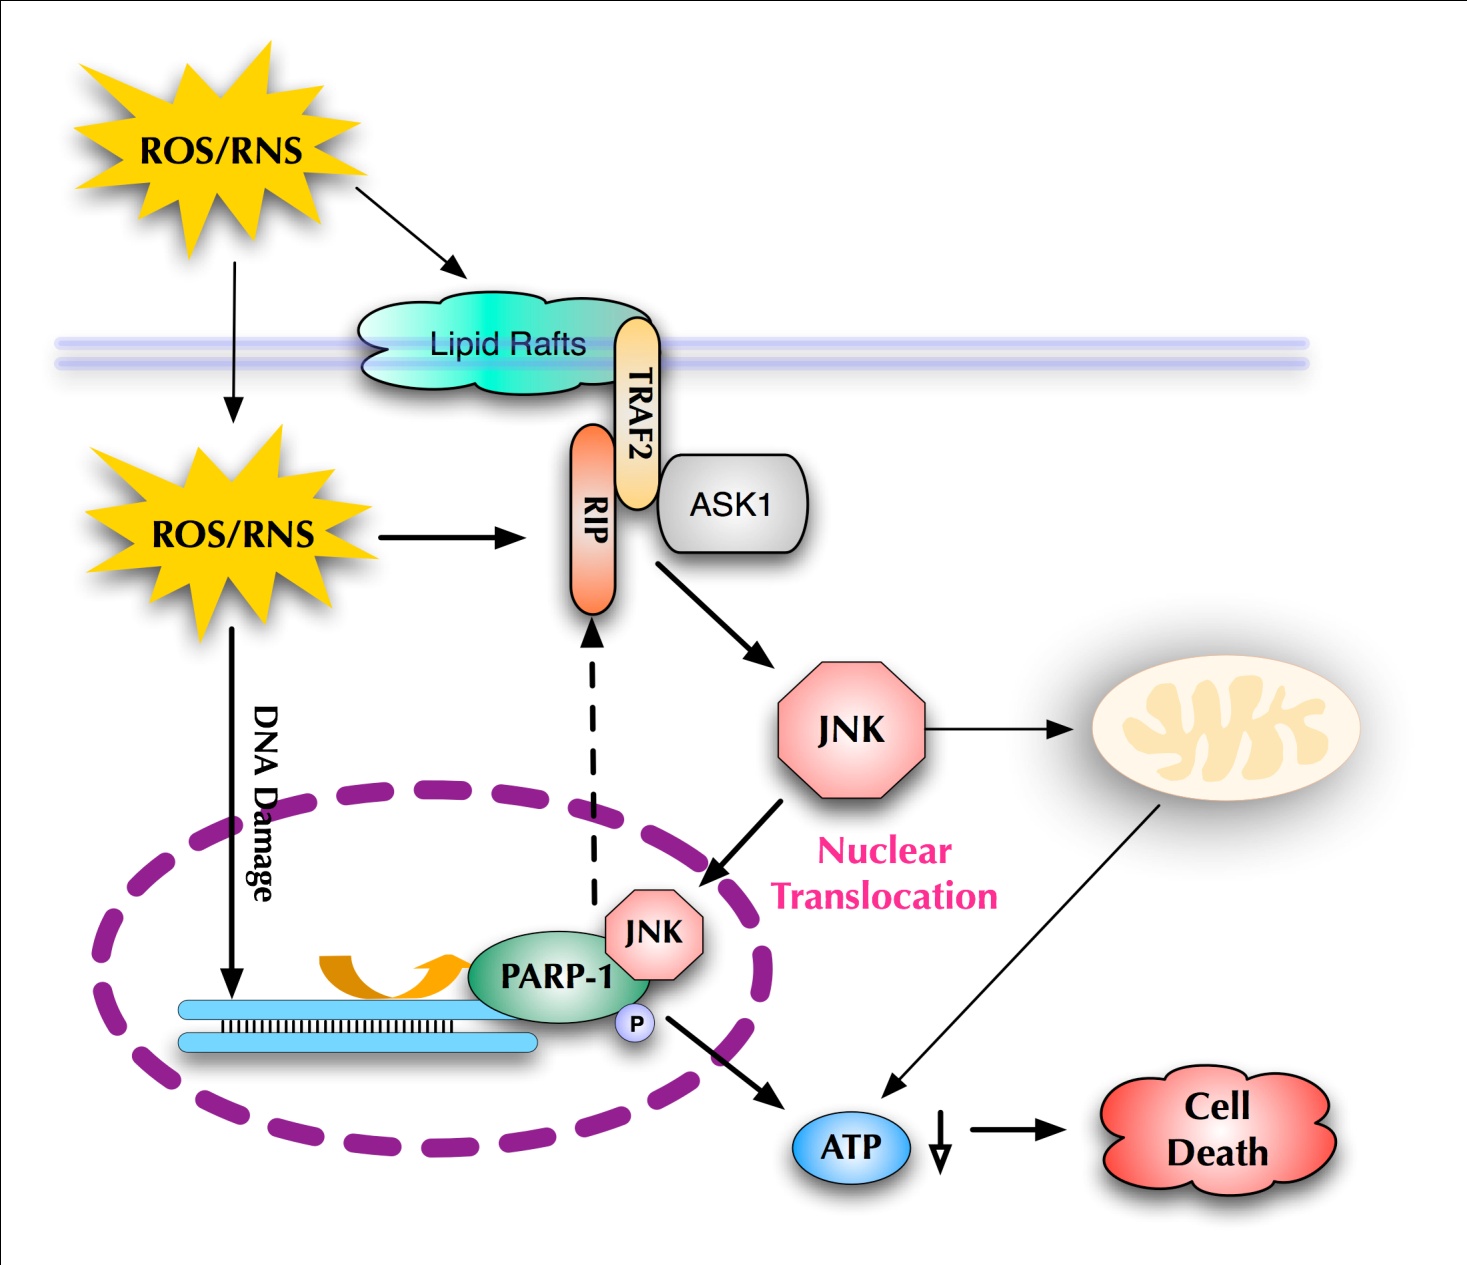 Signaling pathways in ROS/RNS-mediated JNK activation and non-apoptotic cell death